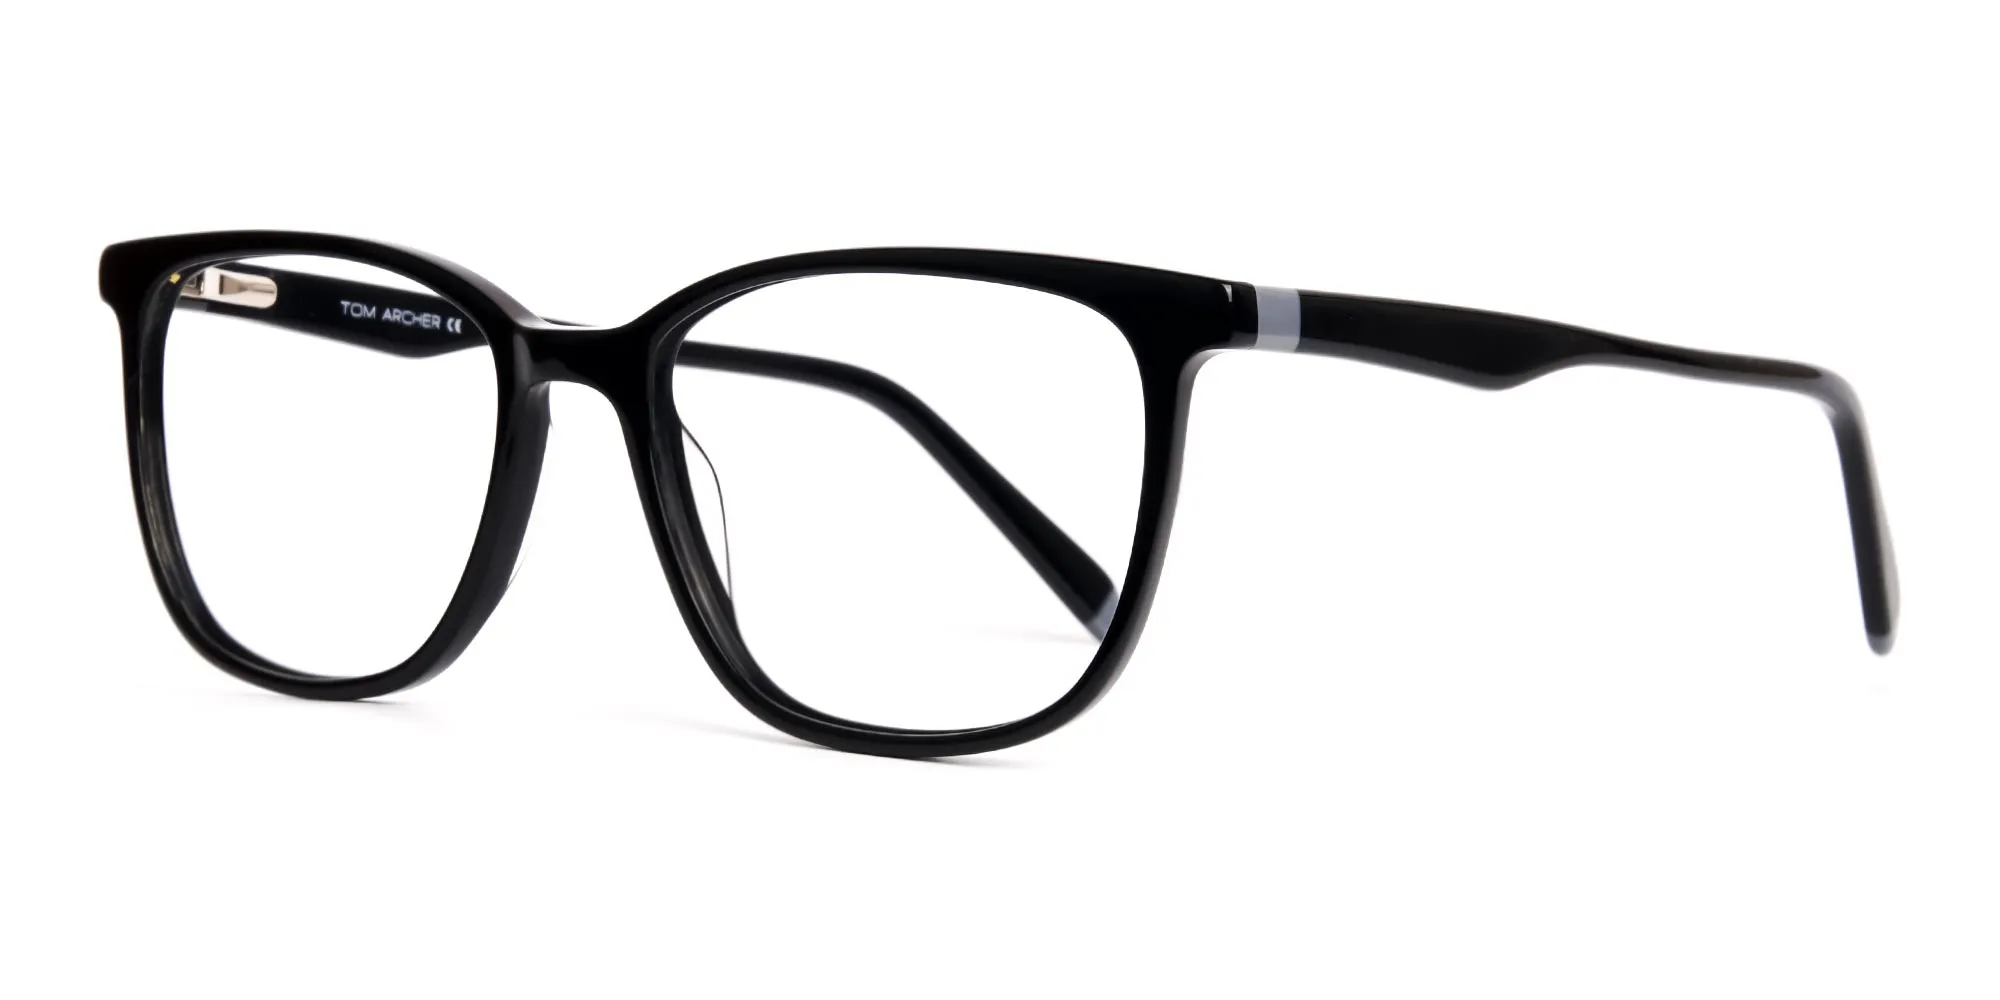 New shiny and glossy Black Square and Rectangular Glasses Frames-2